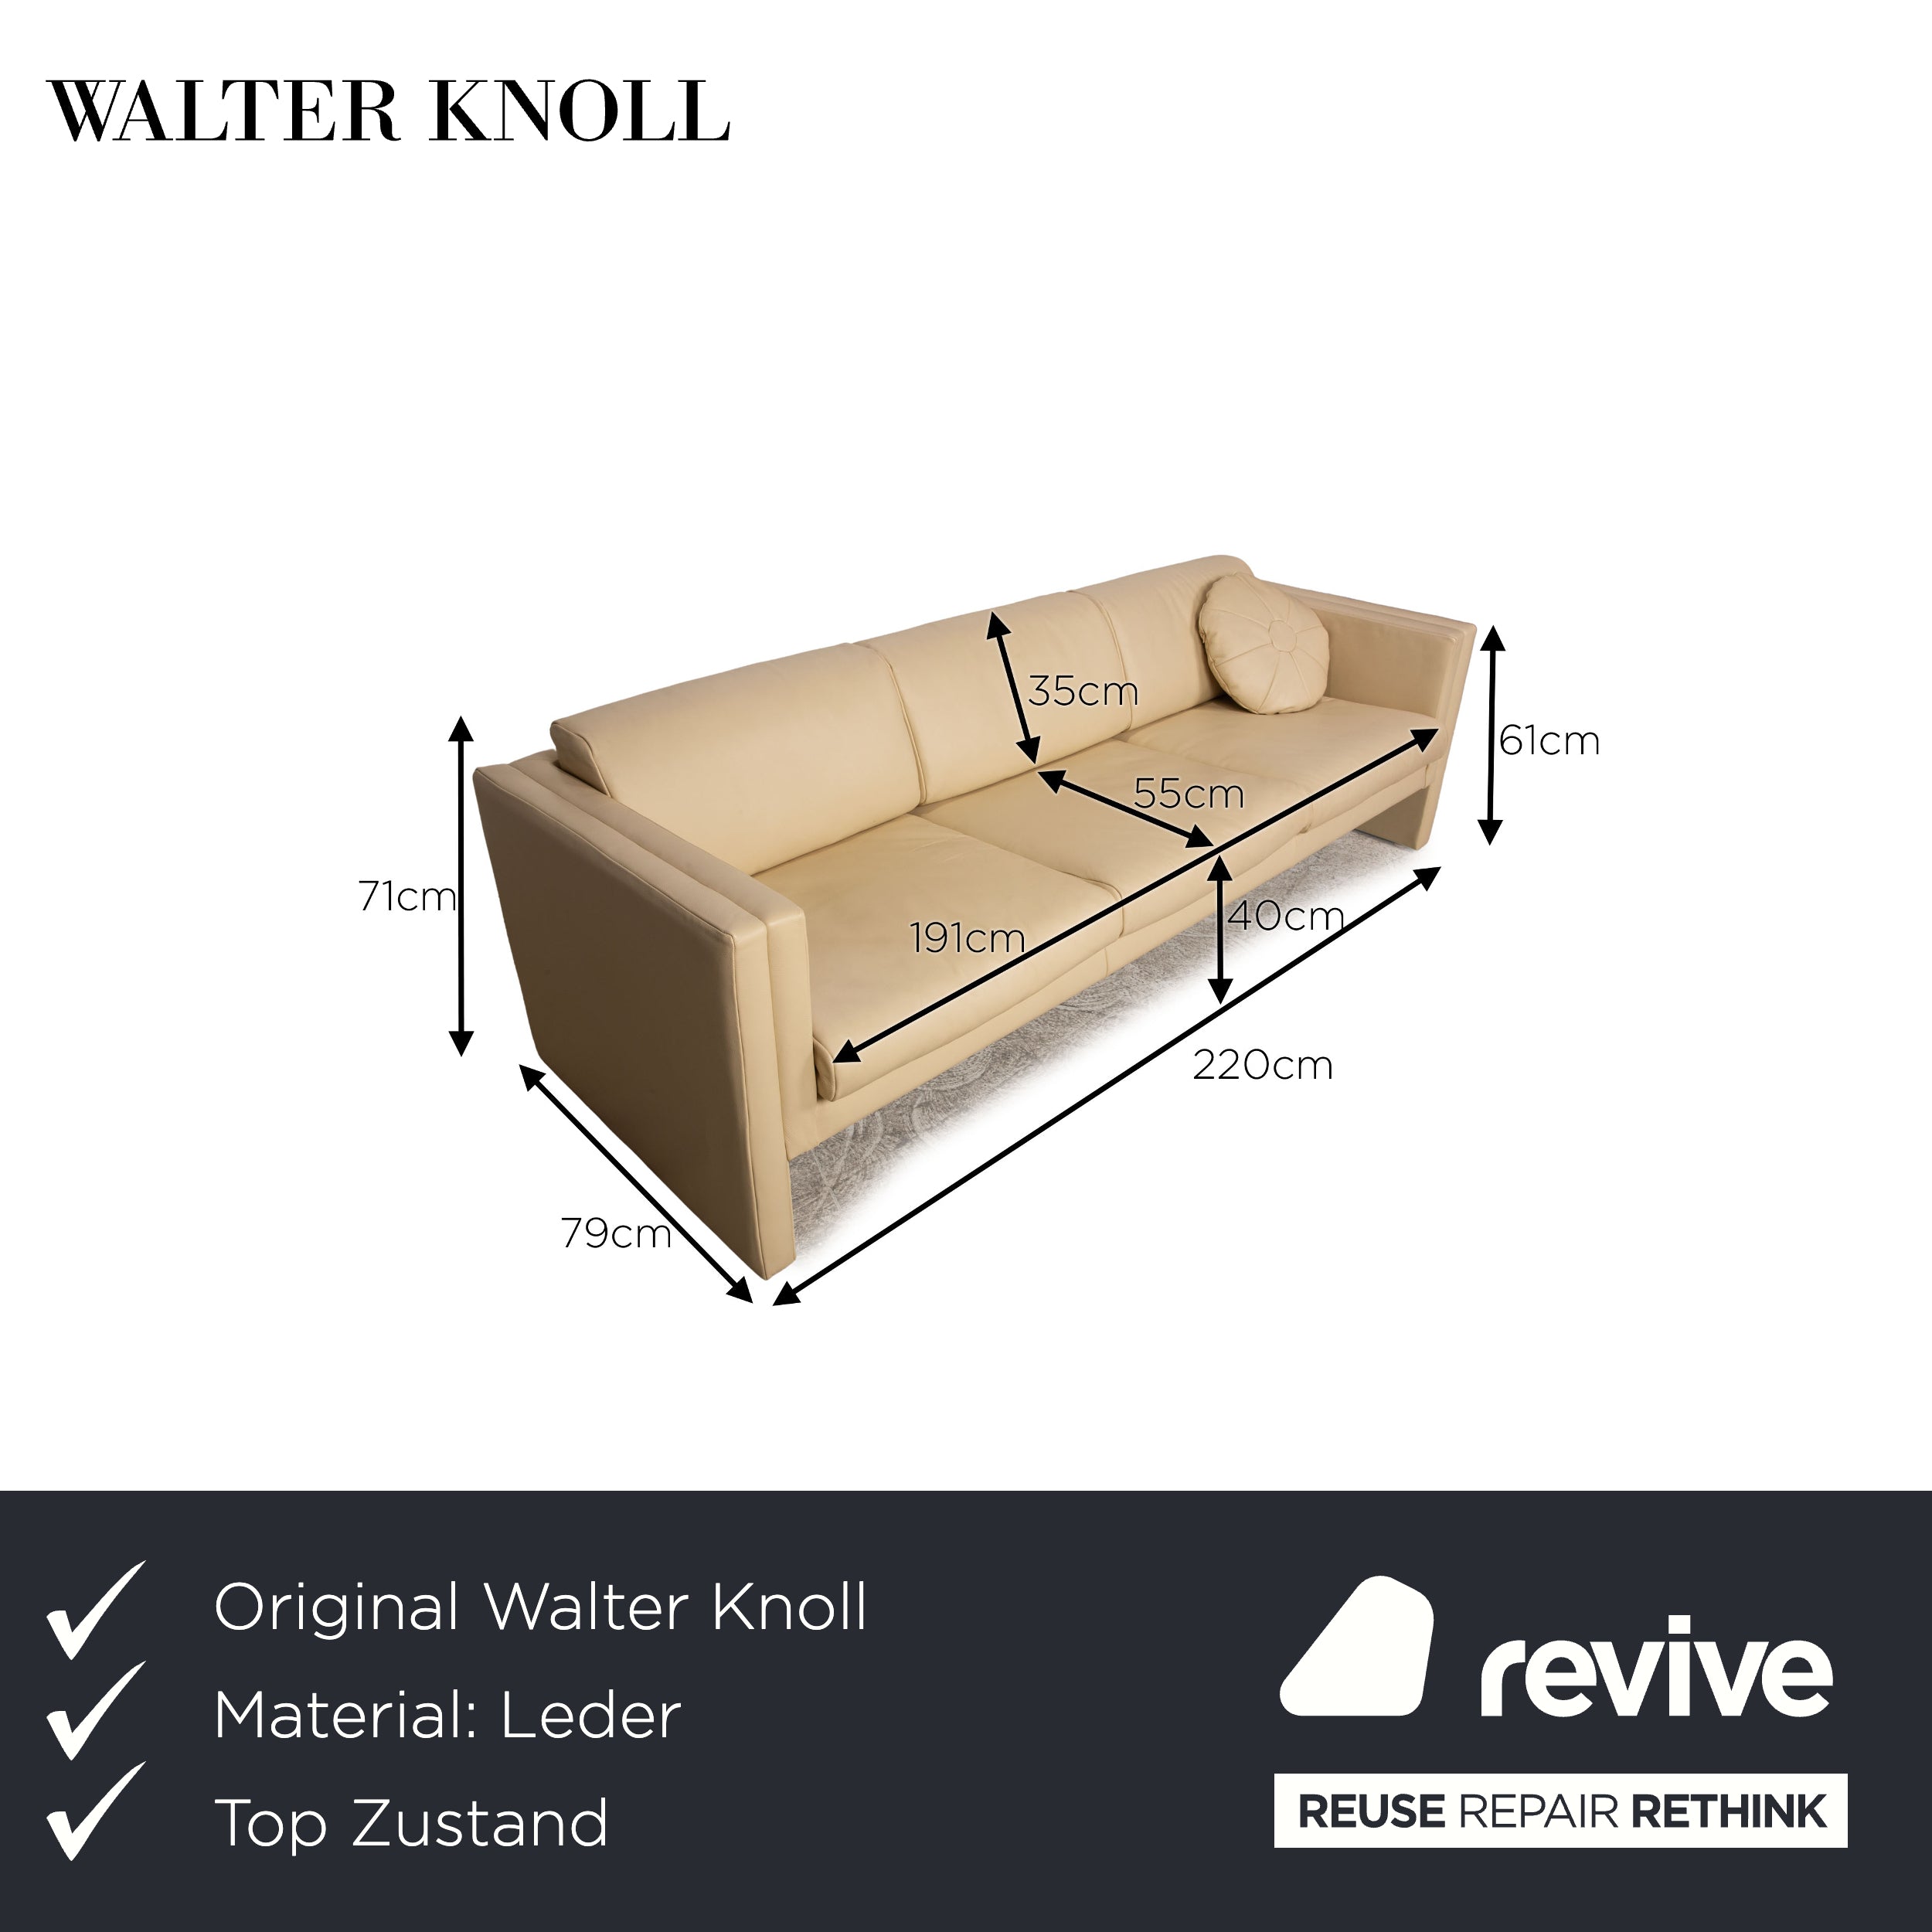 Walter Knoll Studio 191 Leather Three Seater Cream Sofa Couch